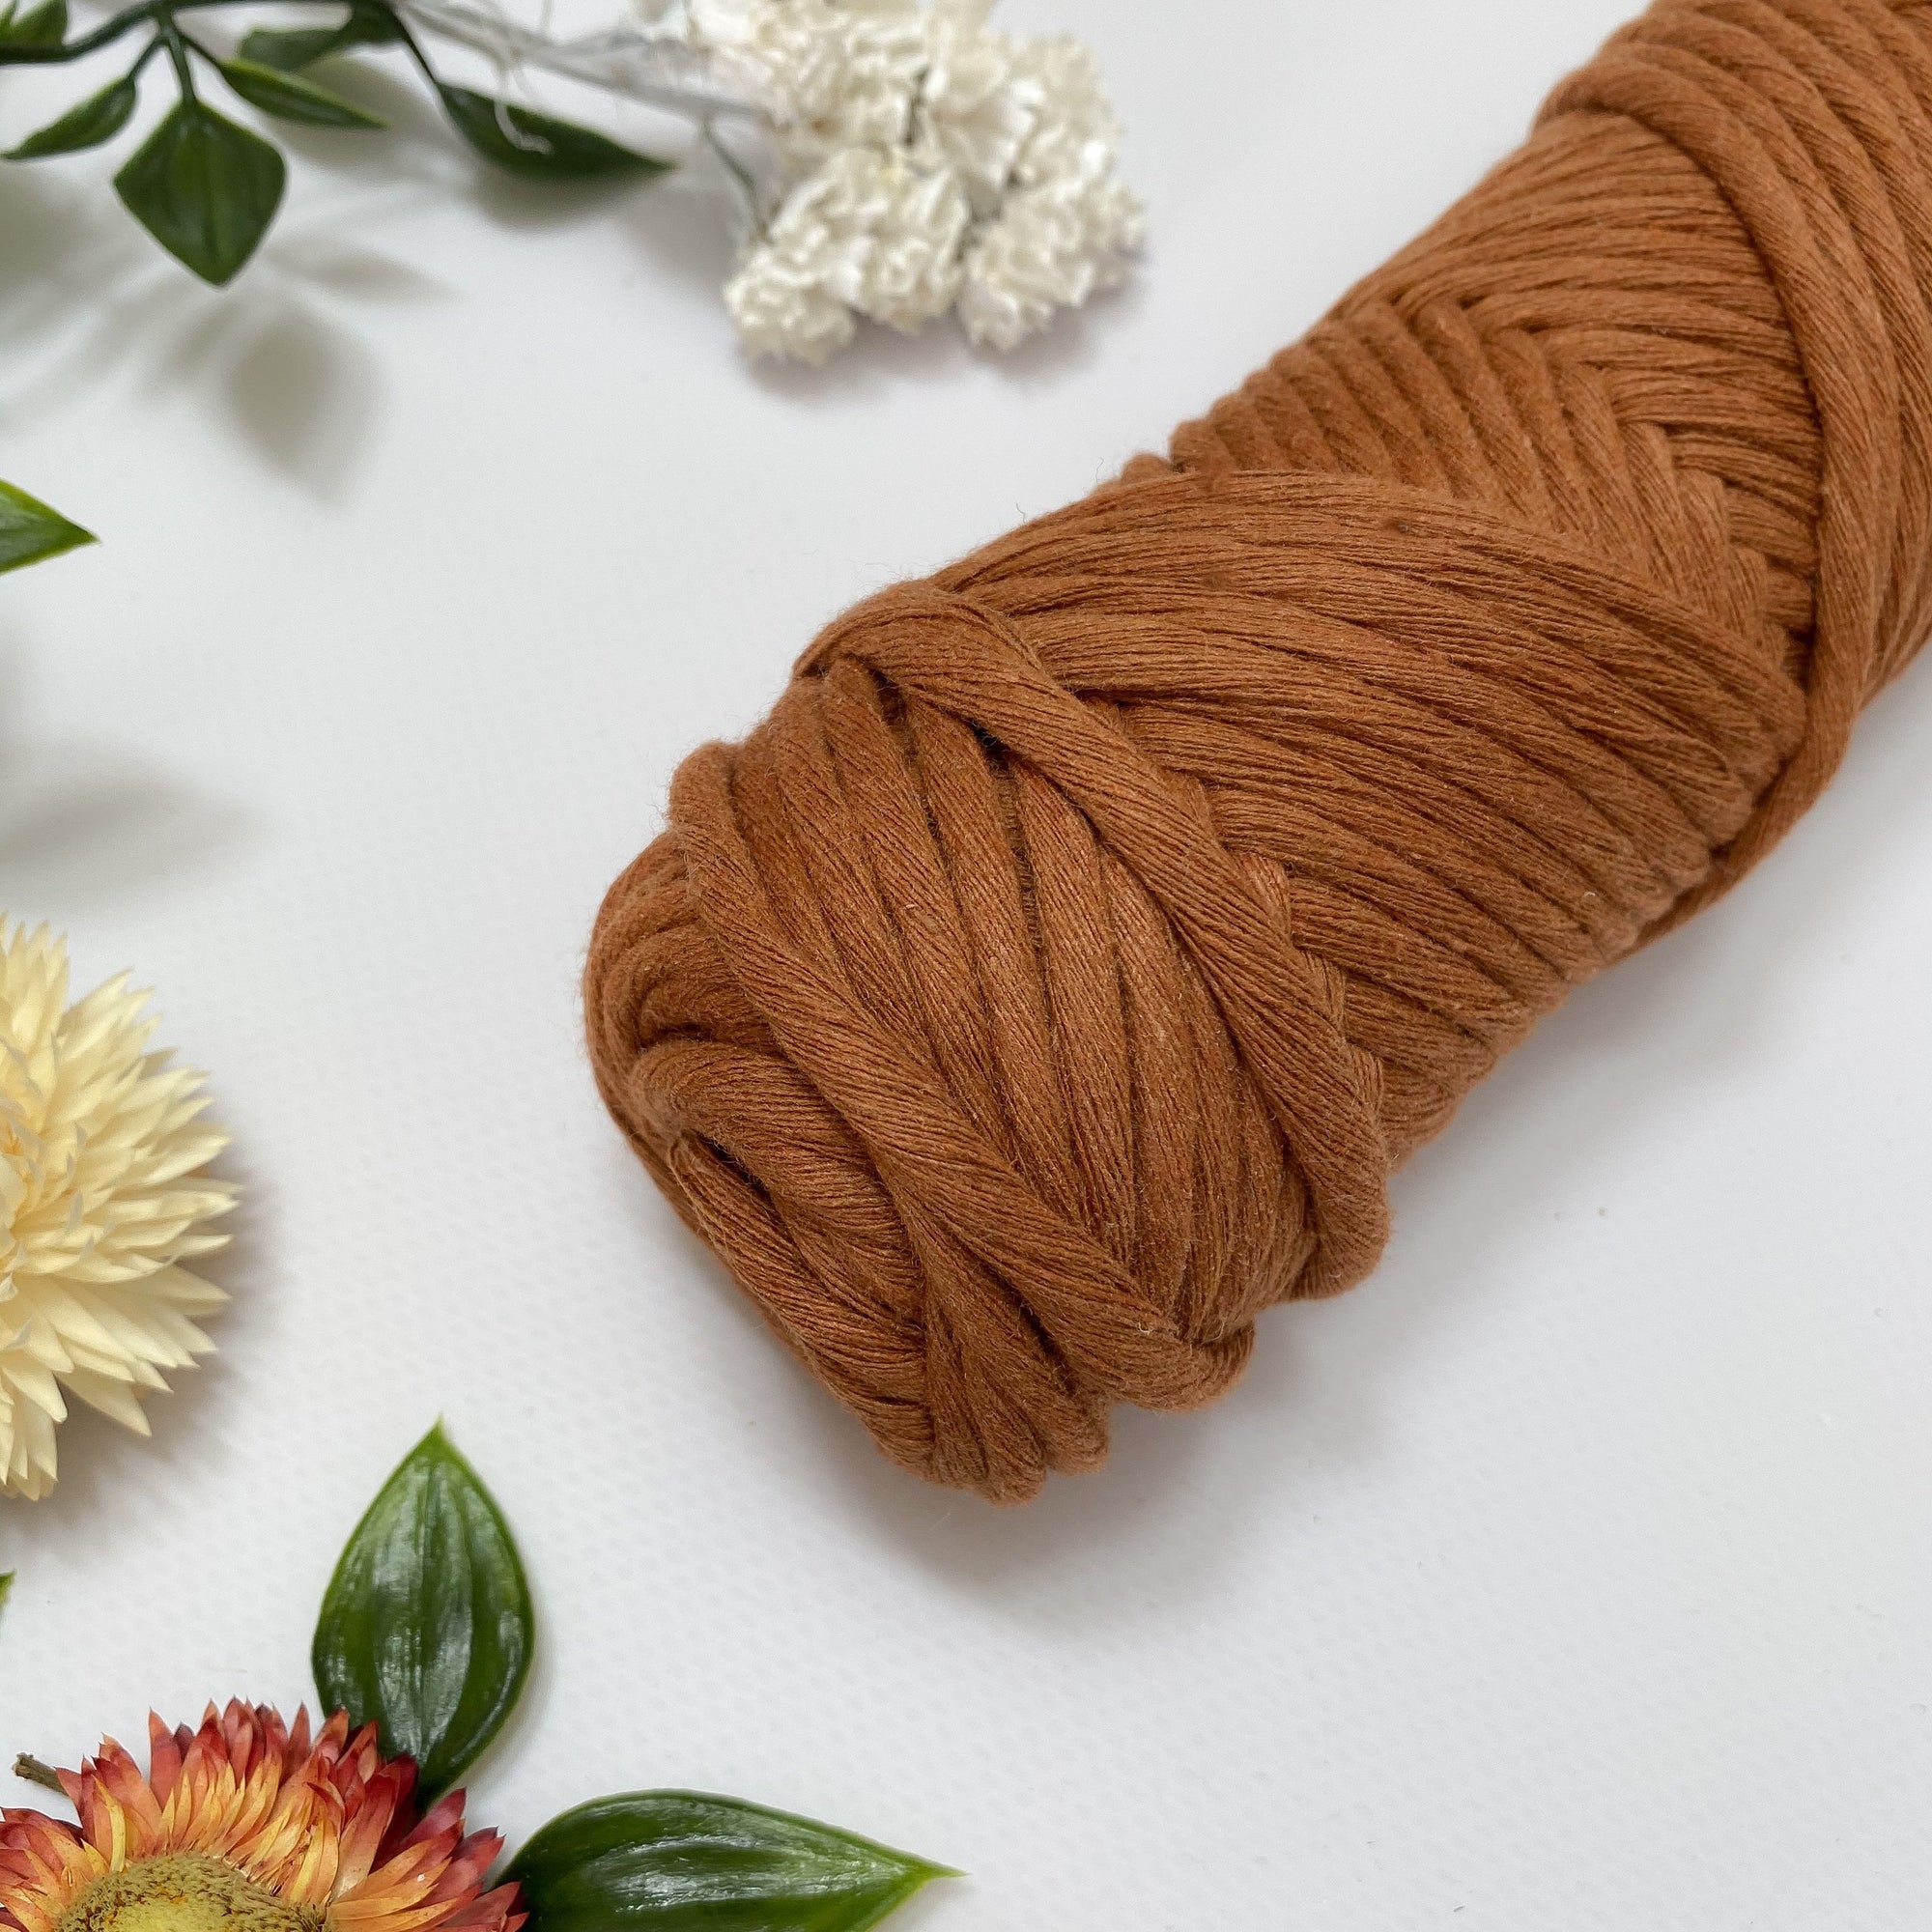 Mary Maker Studio Luxe Colour Cotton Amber 5mm Minis - Luxe Cotton String (50 Colours) macrame cotton macrame rope macrame workshop macrame patterns macrame